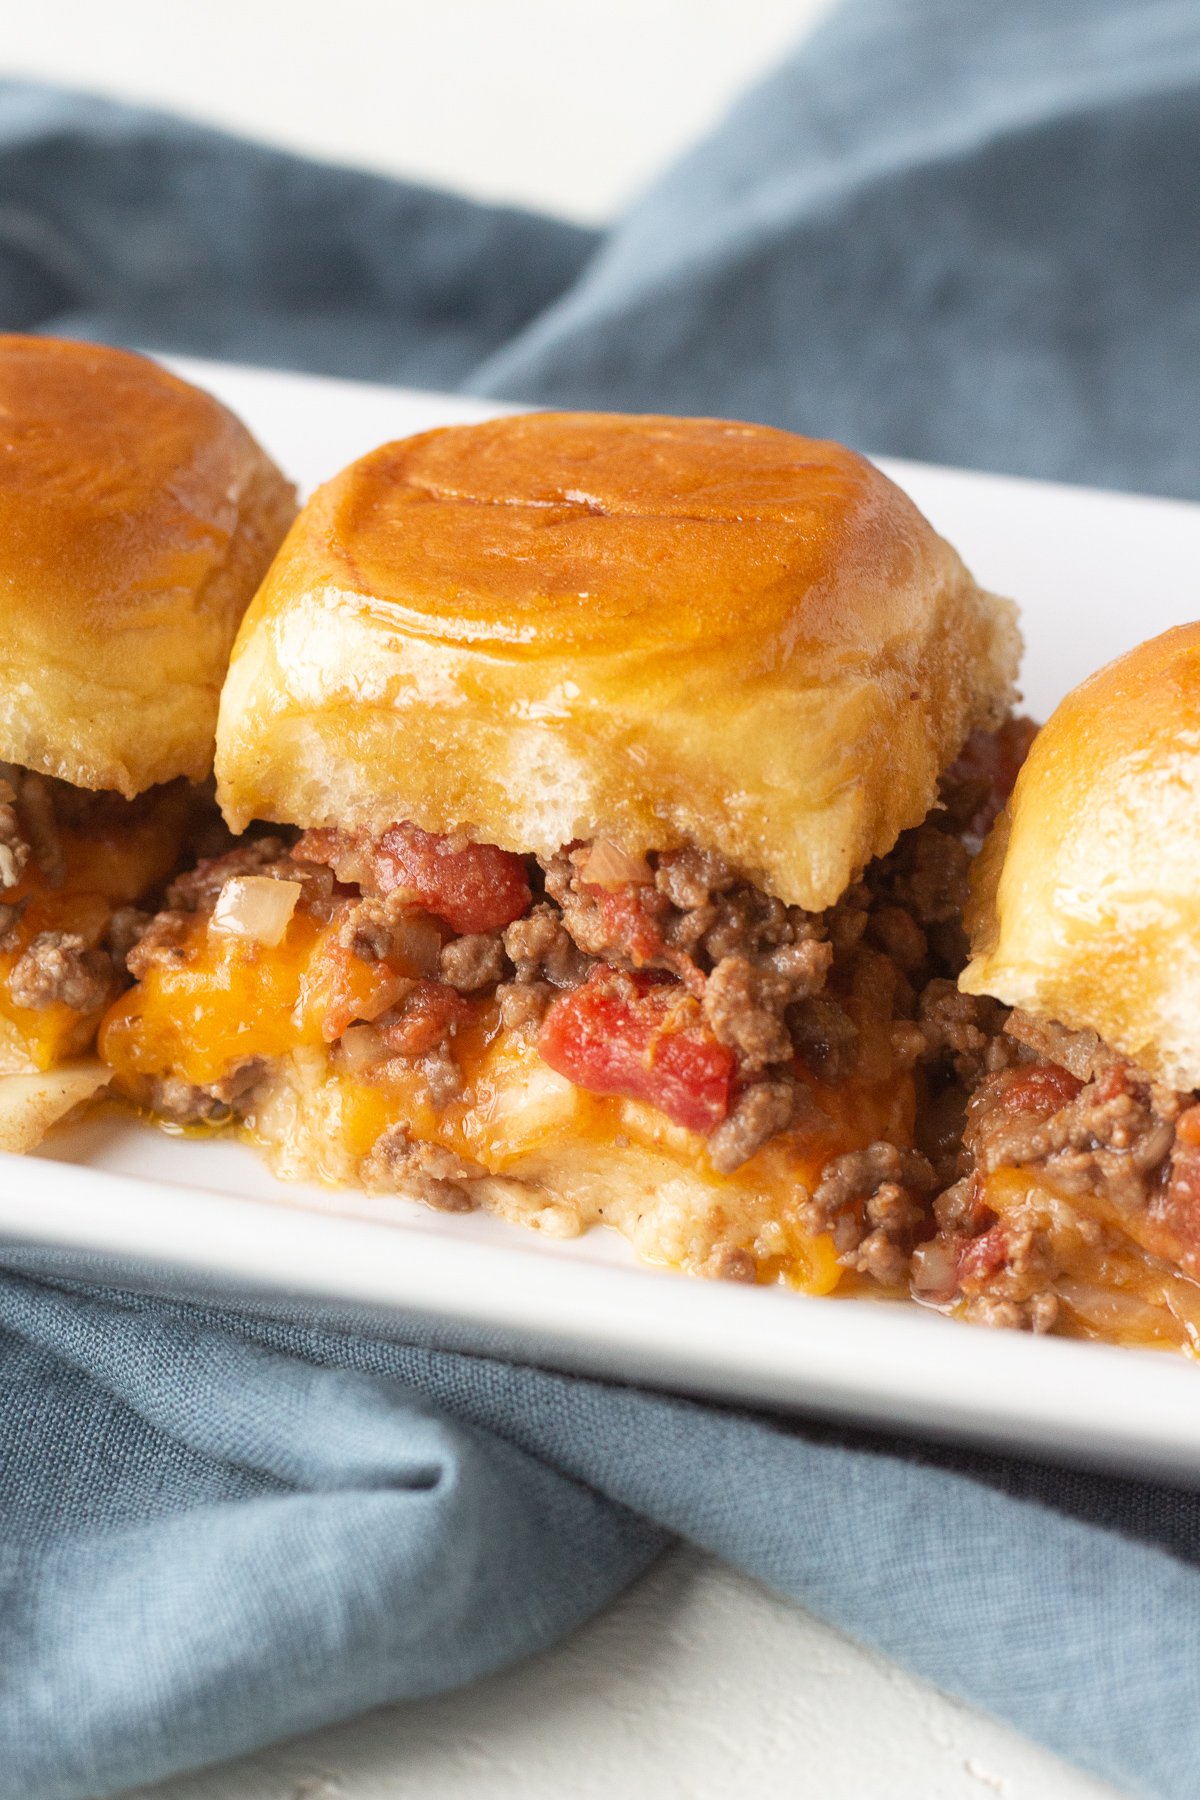 Ground beef sliders on a serving plate.